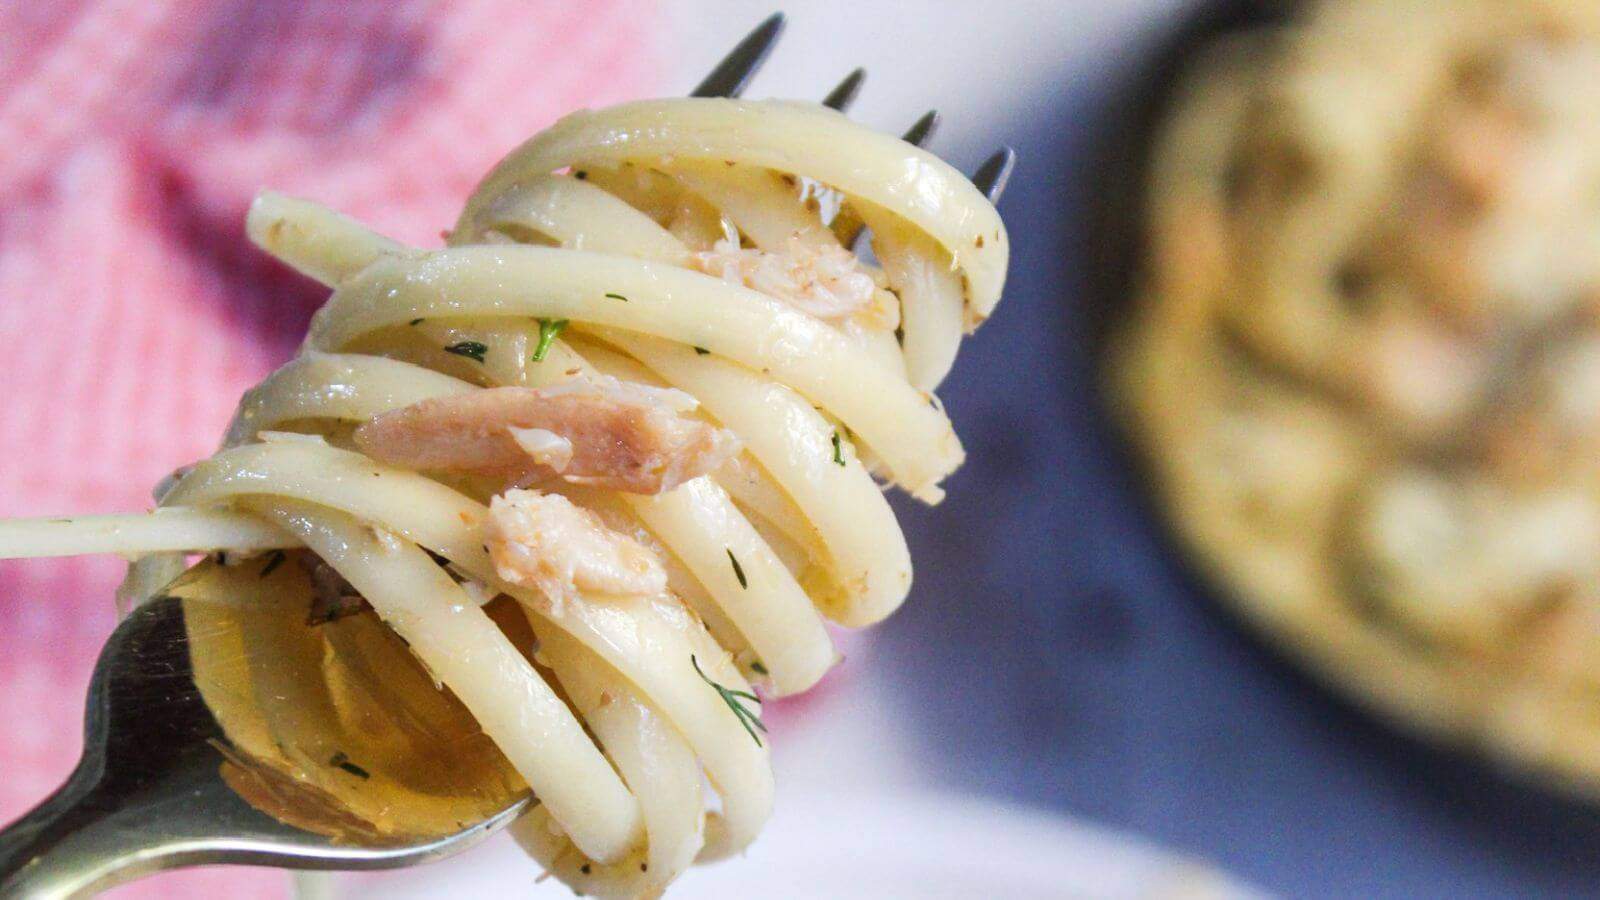 A close-up of spaghetti twirled on a fork with bits of crab meat and herbs, with more pasta and a dish in the blurred background.